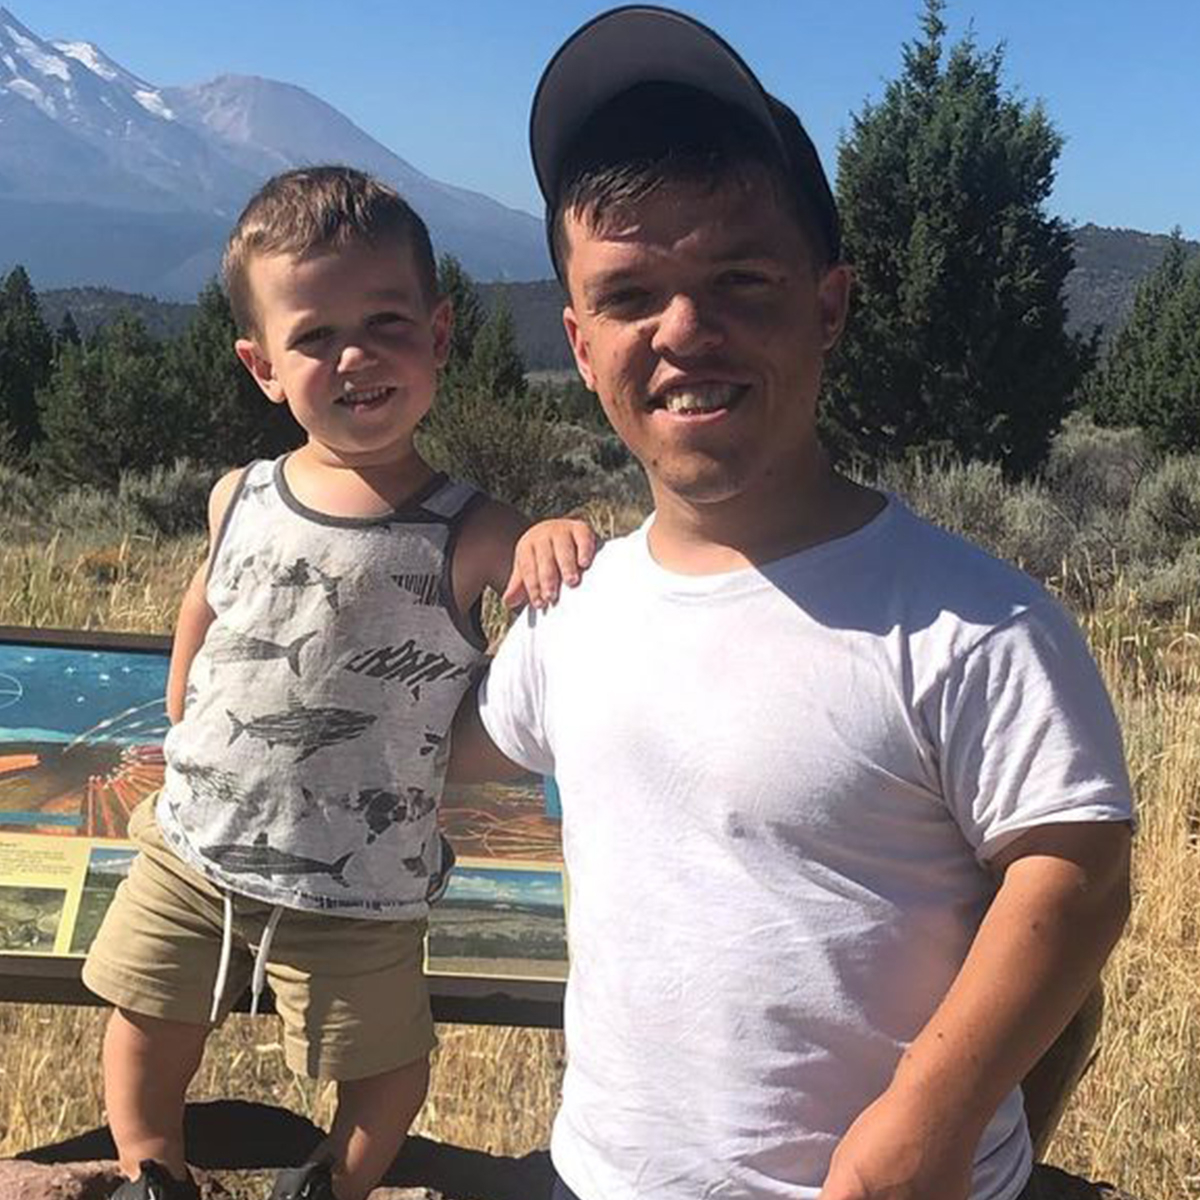 See Little People Big World's Zach Roloff Help His Son Grapple with Dwarfism Differences